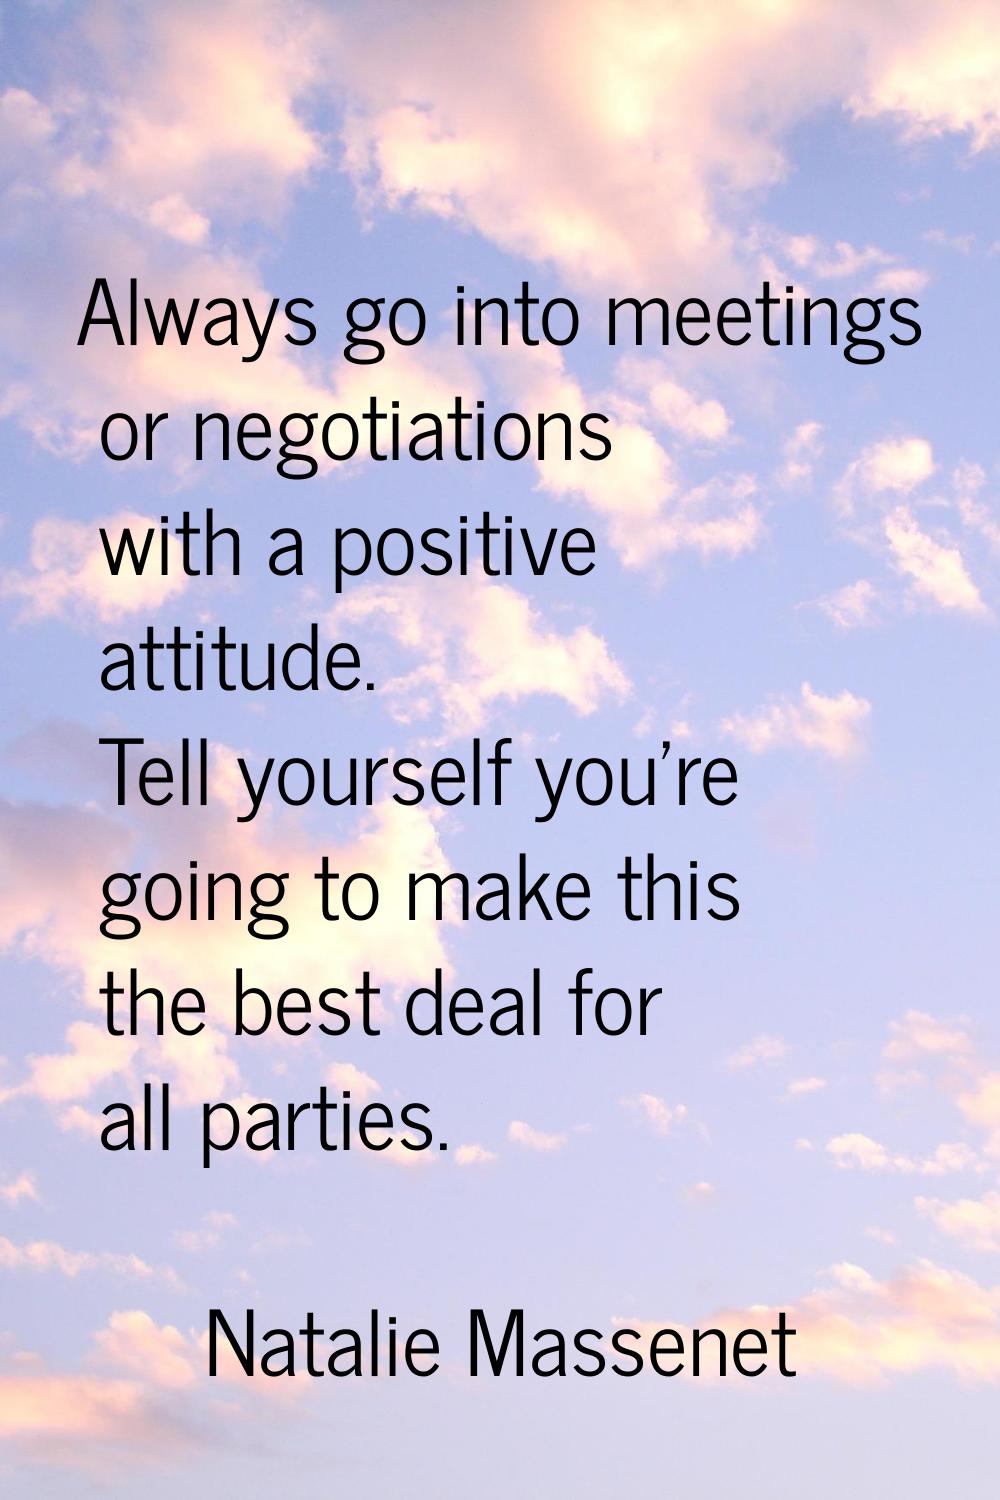 Always go into meetings or negotiations with a positive attitude. Tell yourself you're going to mak